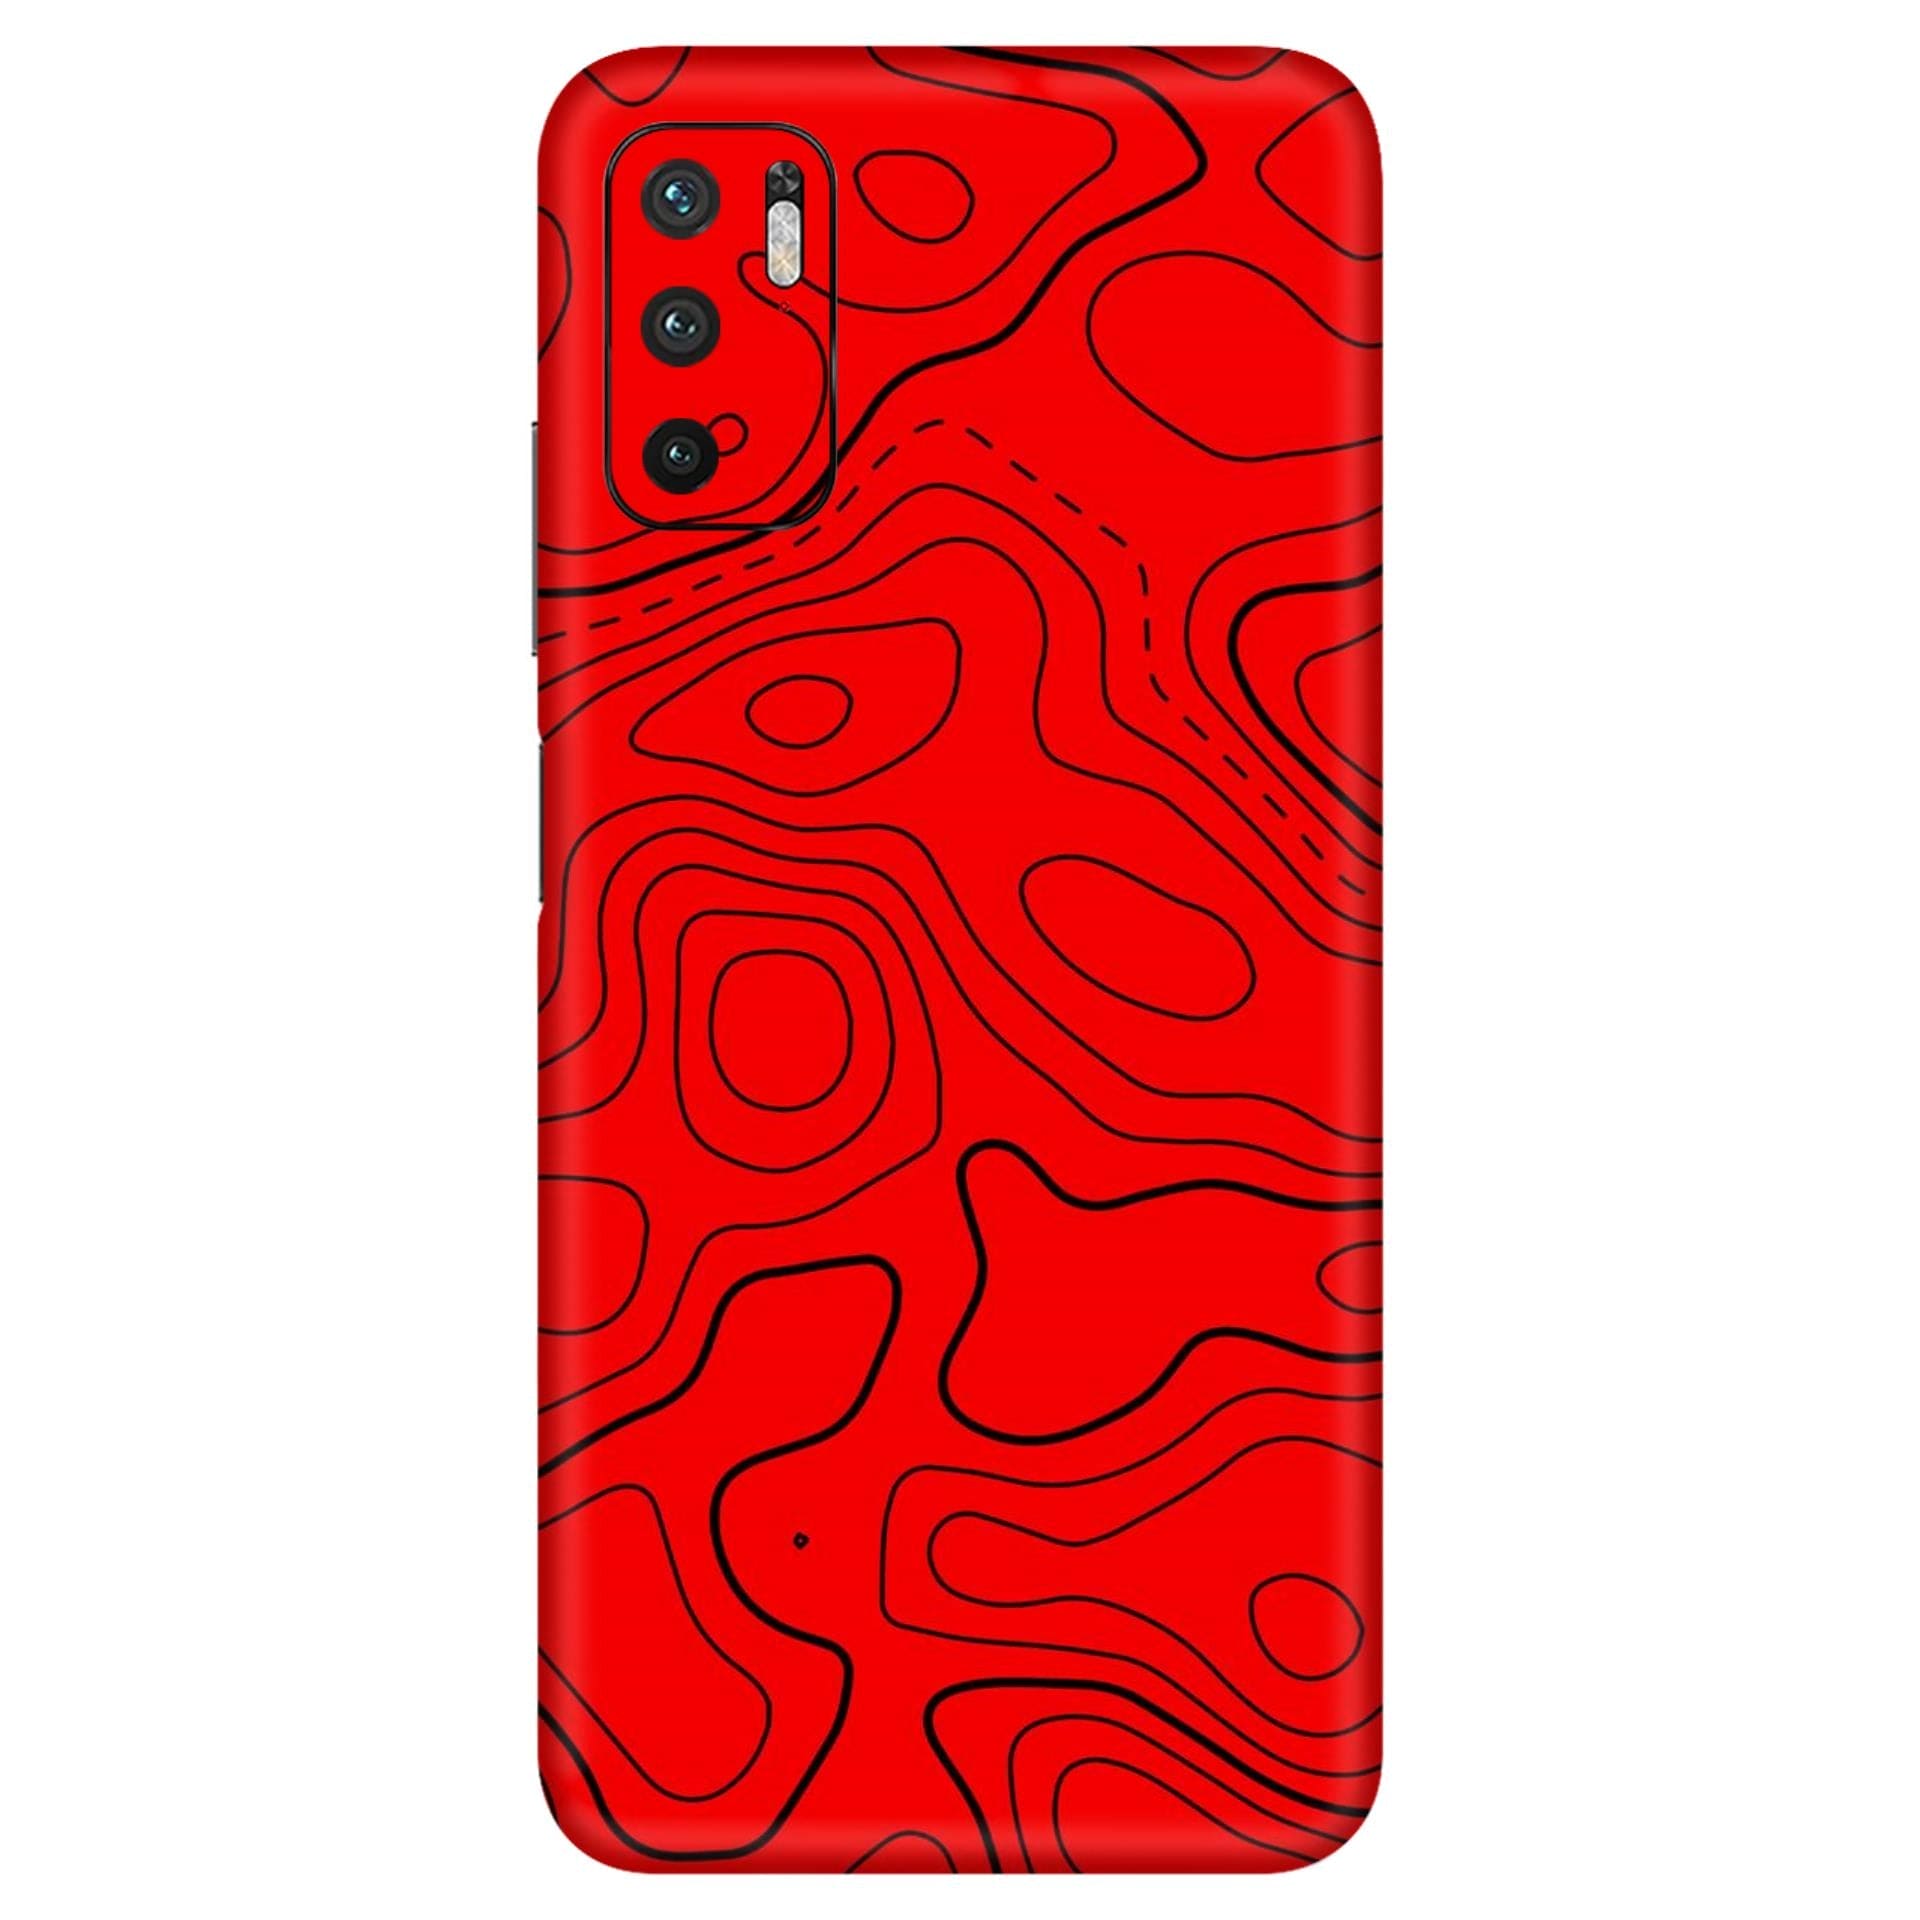 Redmi Note 10T Damascus Red skins